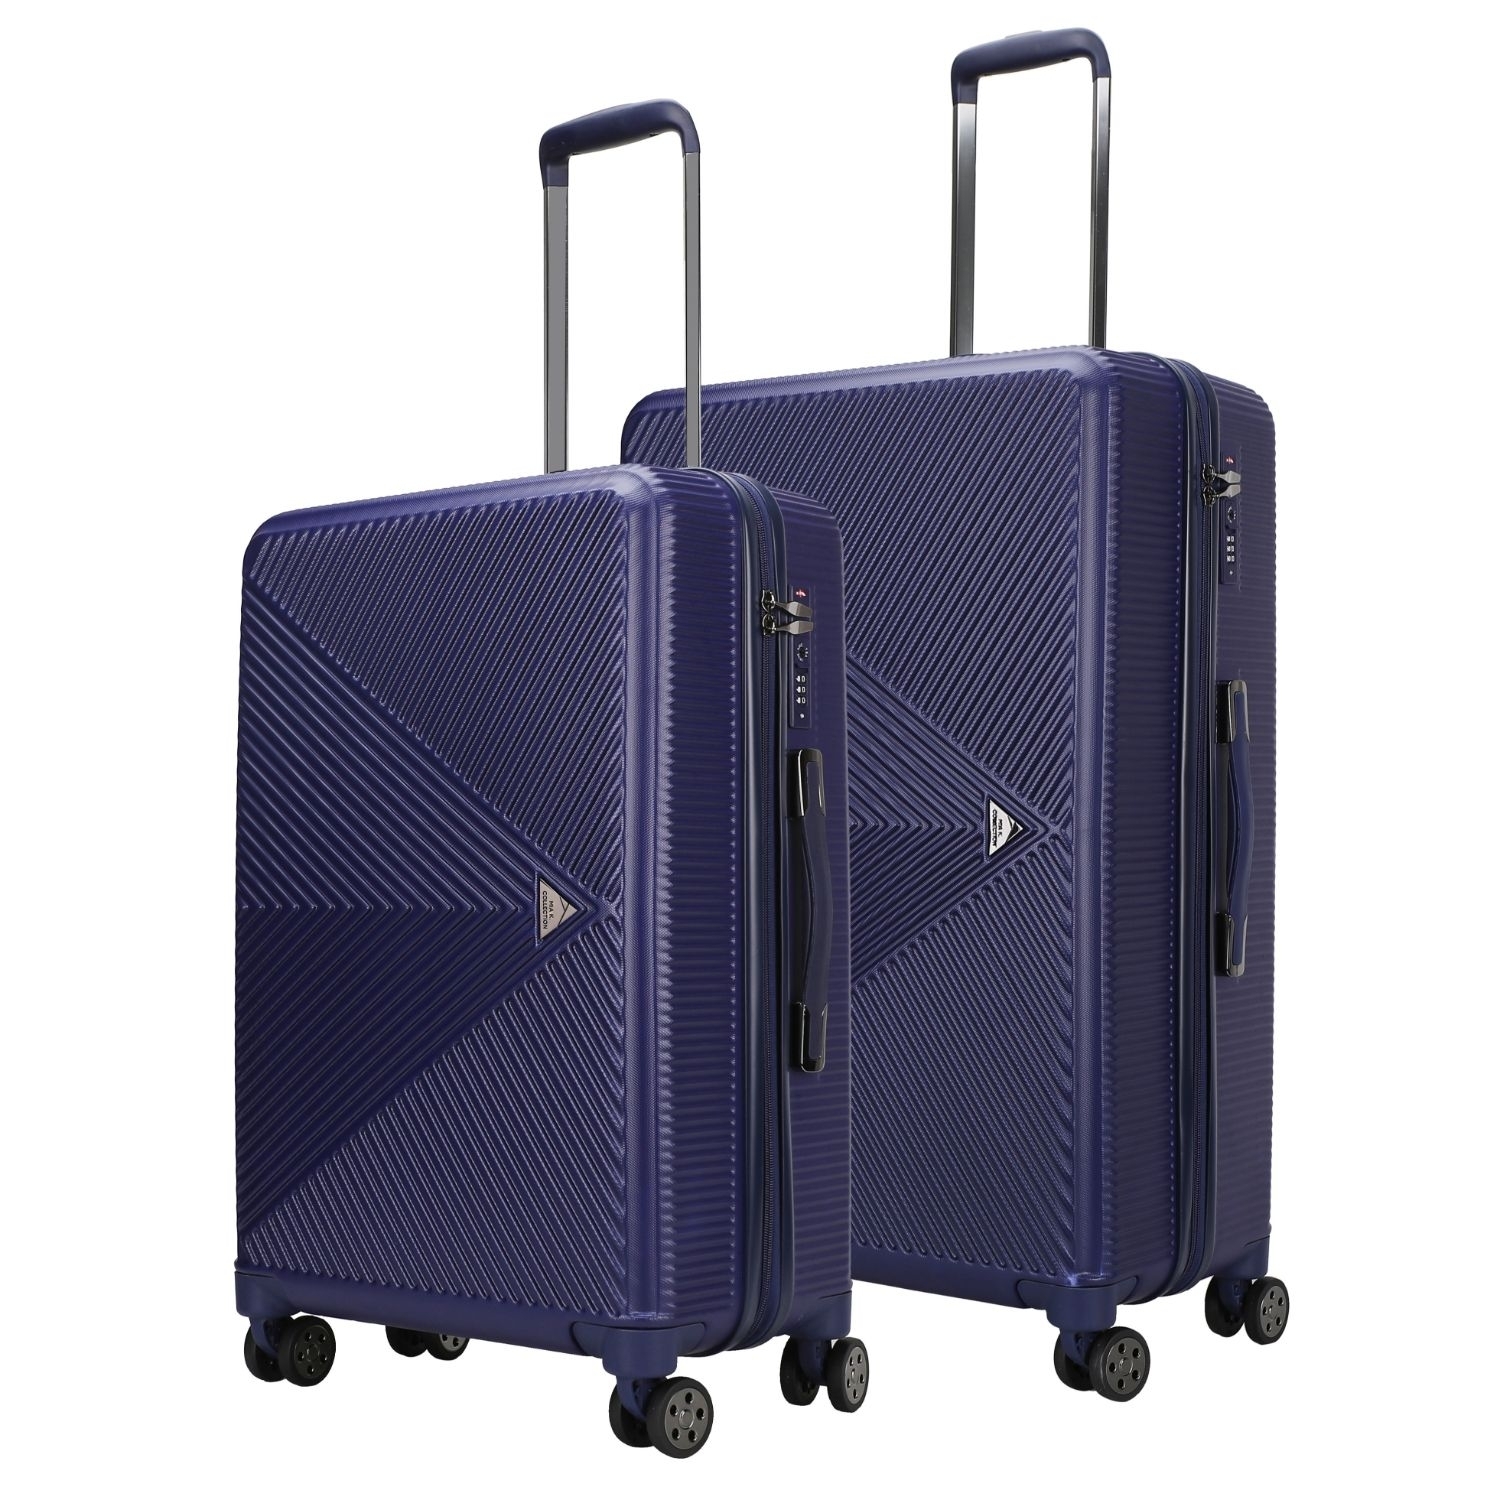 MKF Collection Felicity Luggage Set Extra Large And Large By Mia K- 2 Pieces - Navy